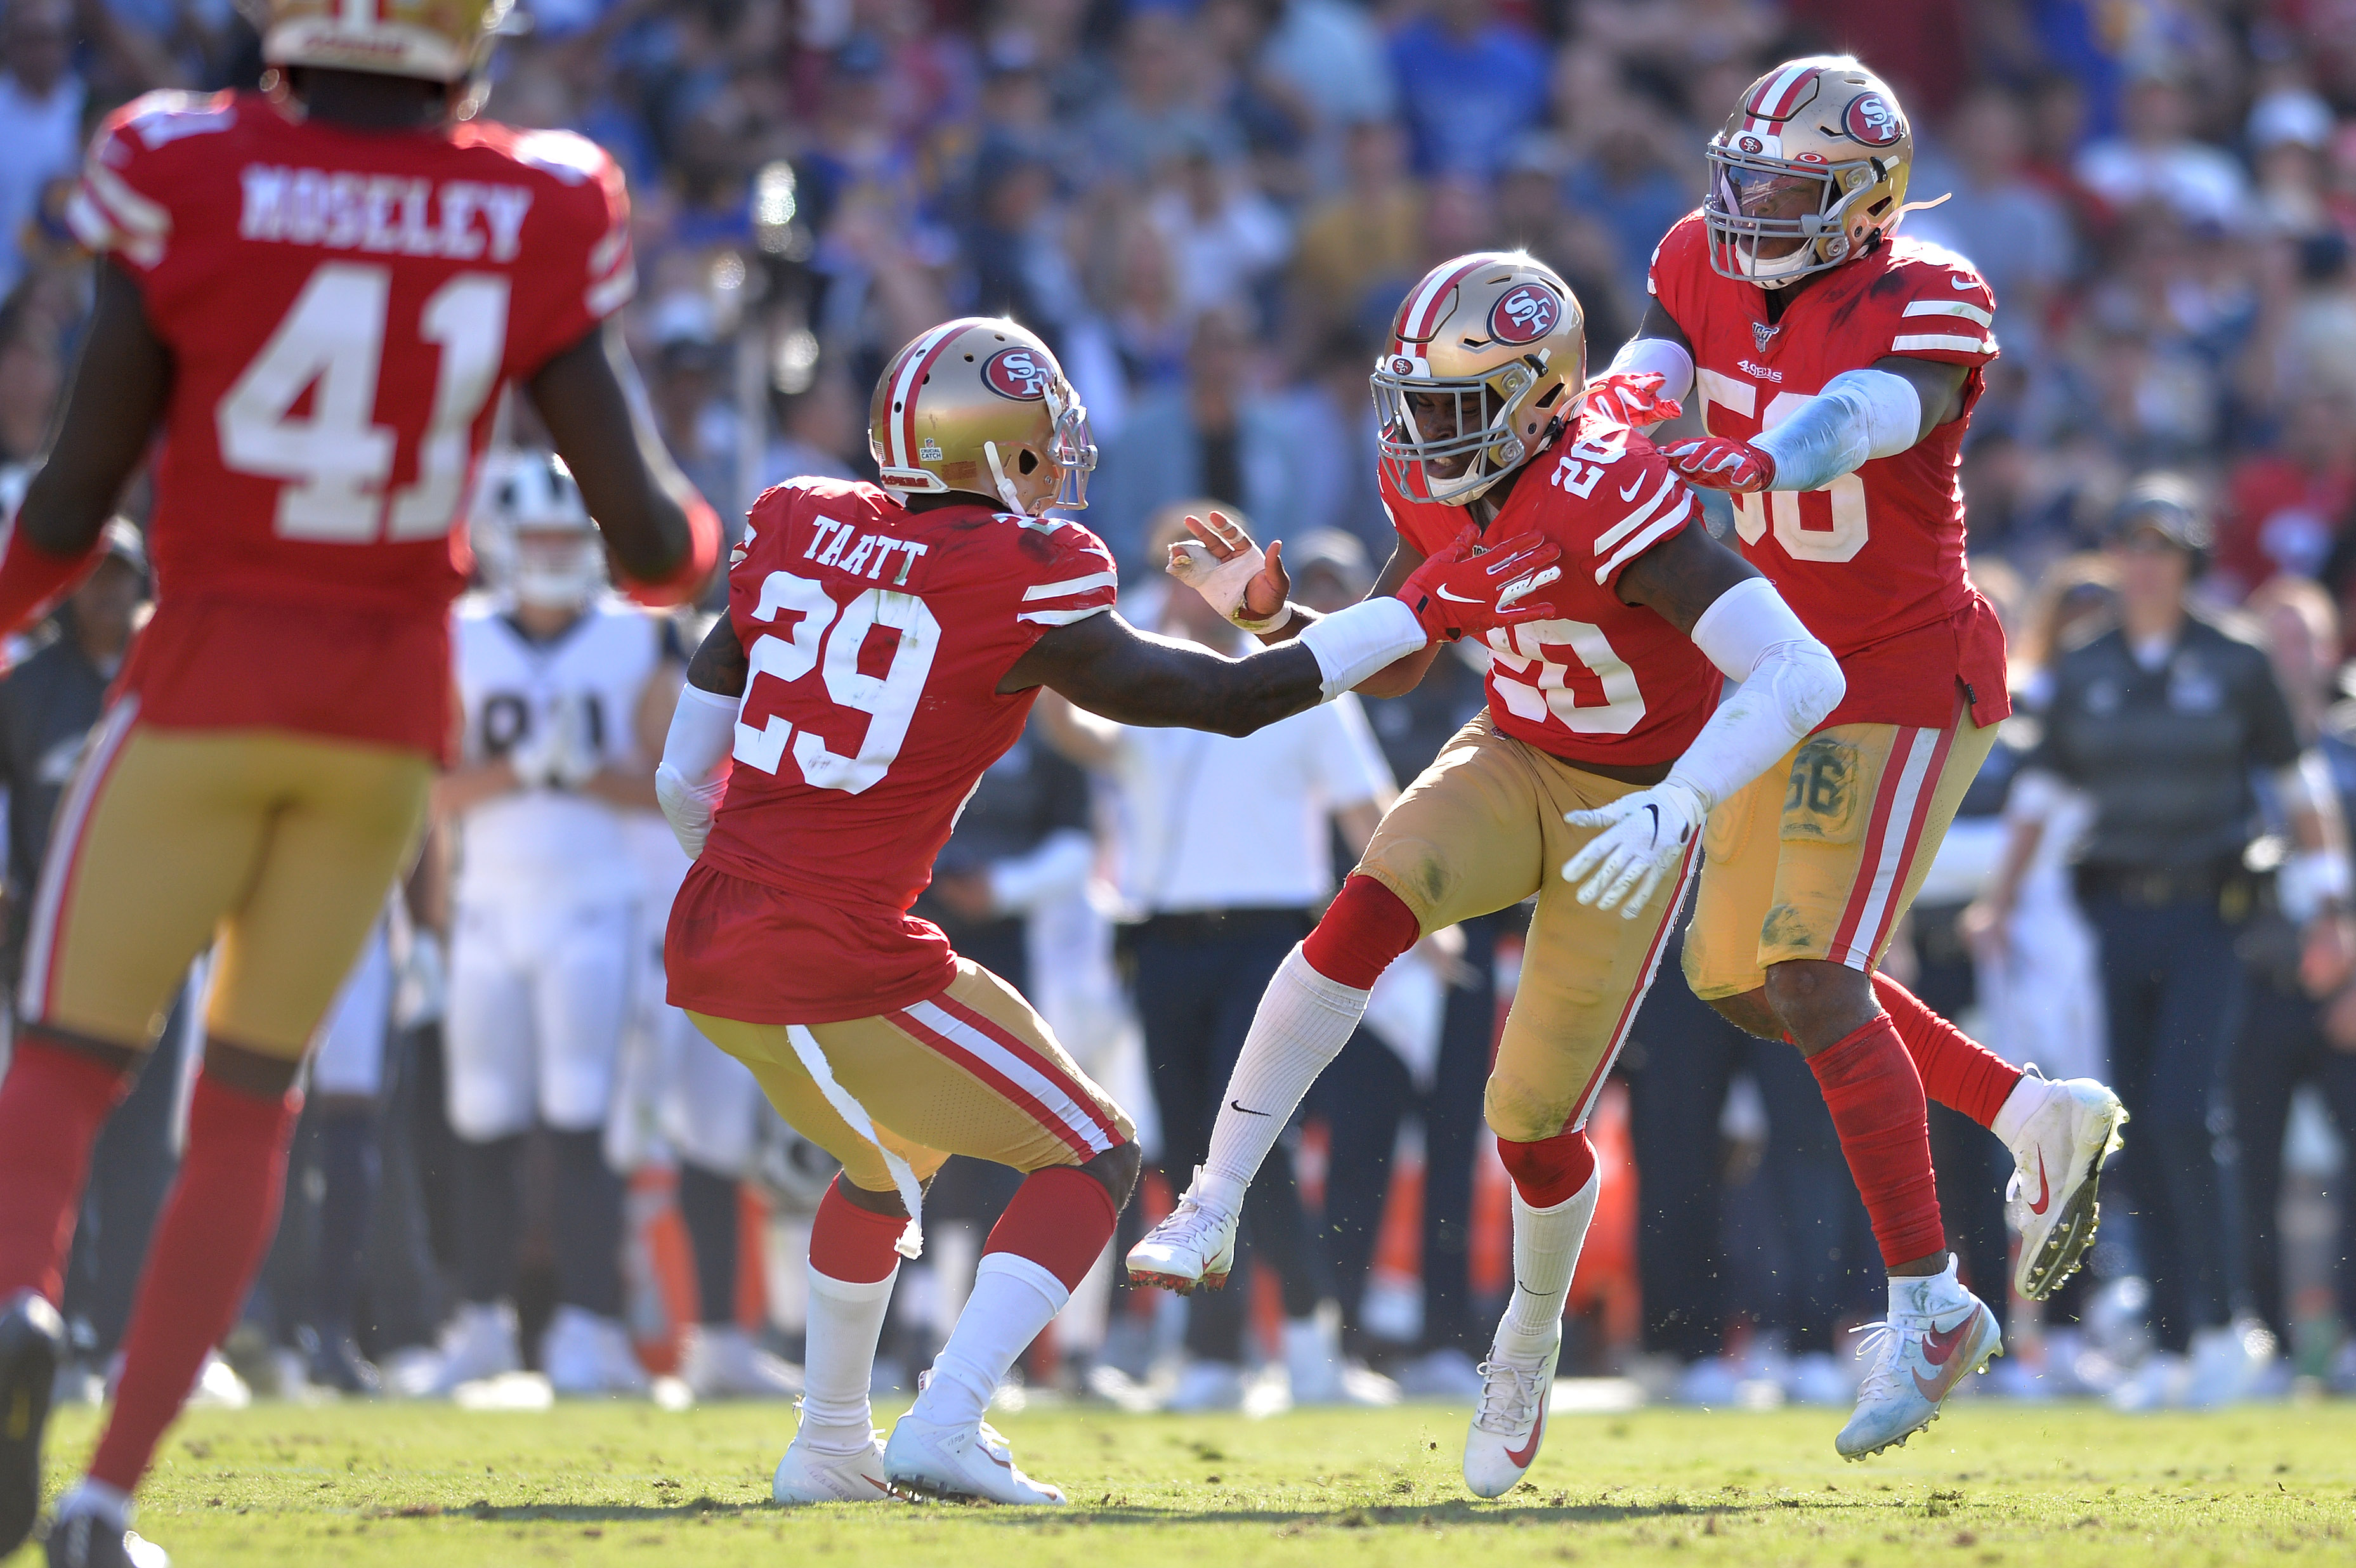 Why the 49ers Defense in 2019 Trumps Any Defense During the Harbaugh Era